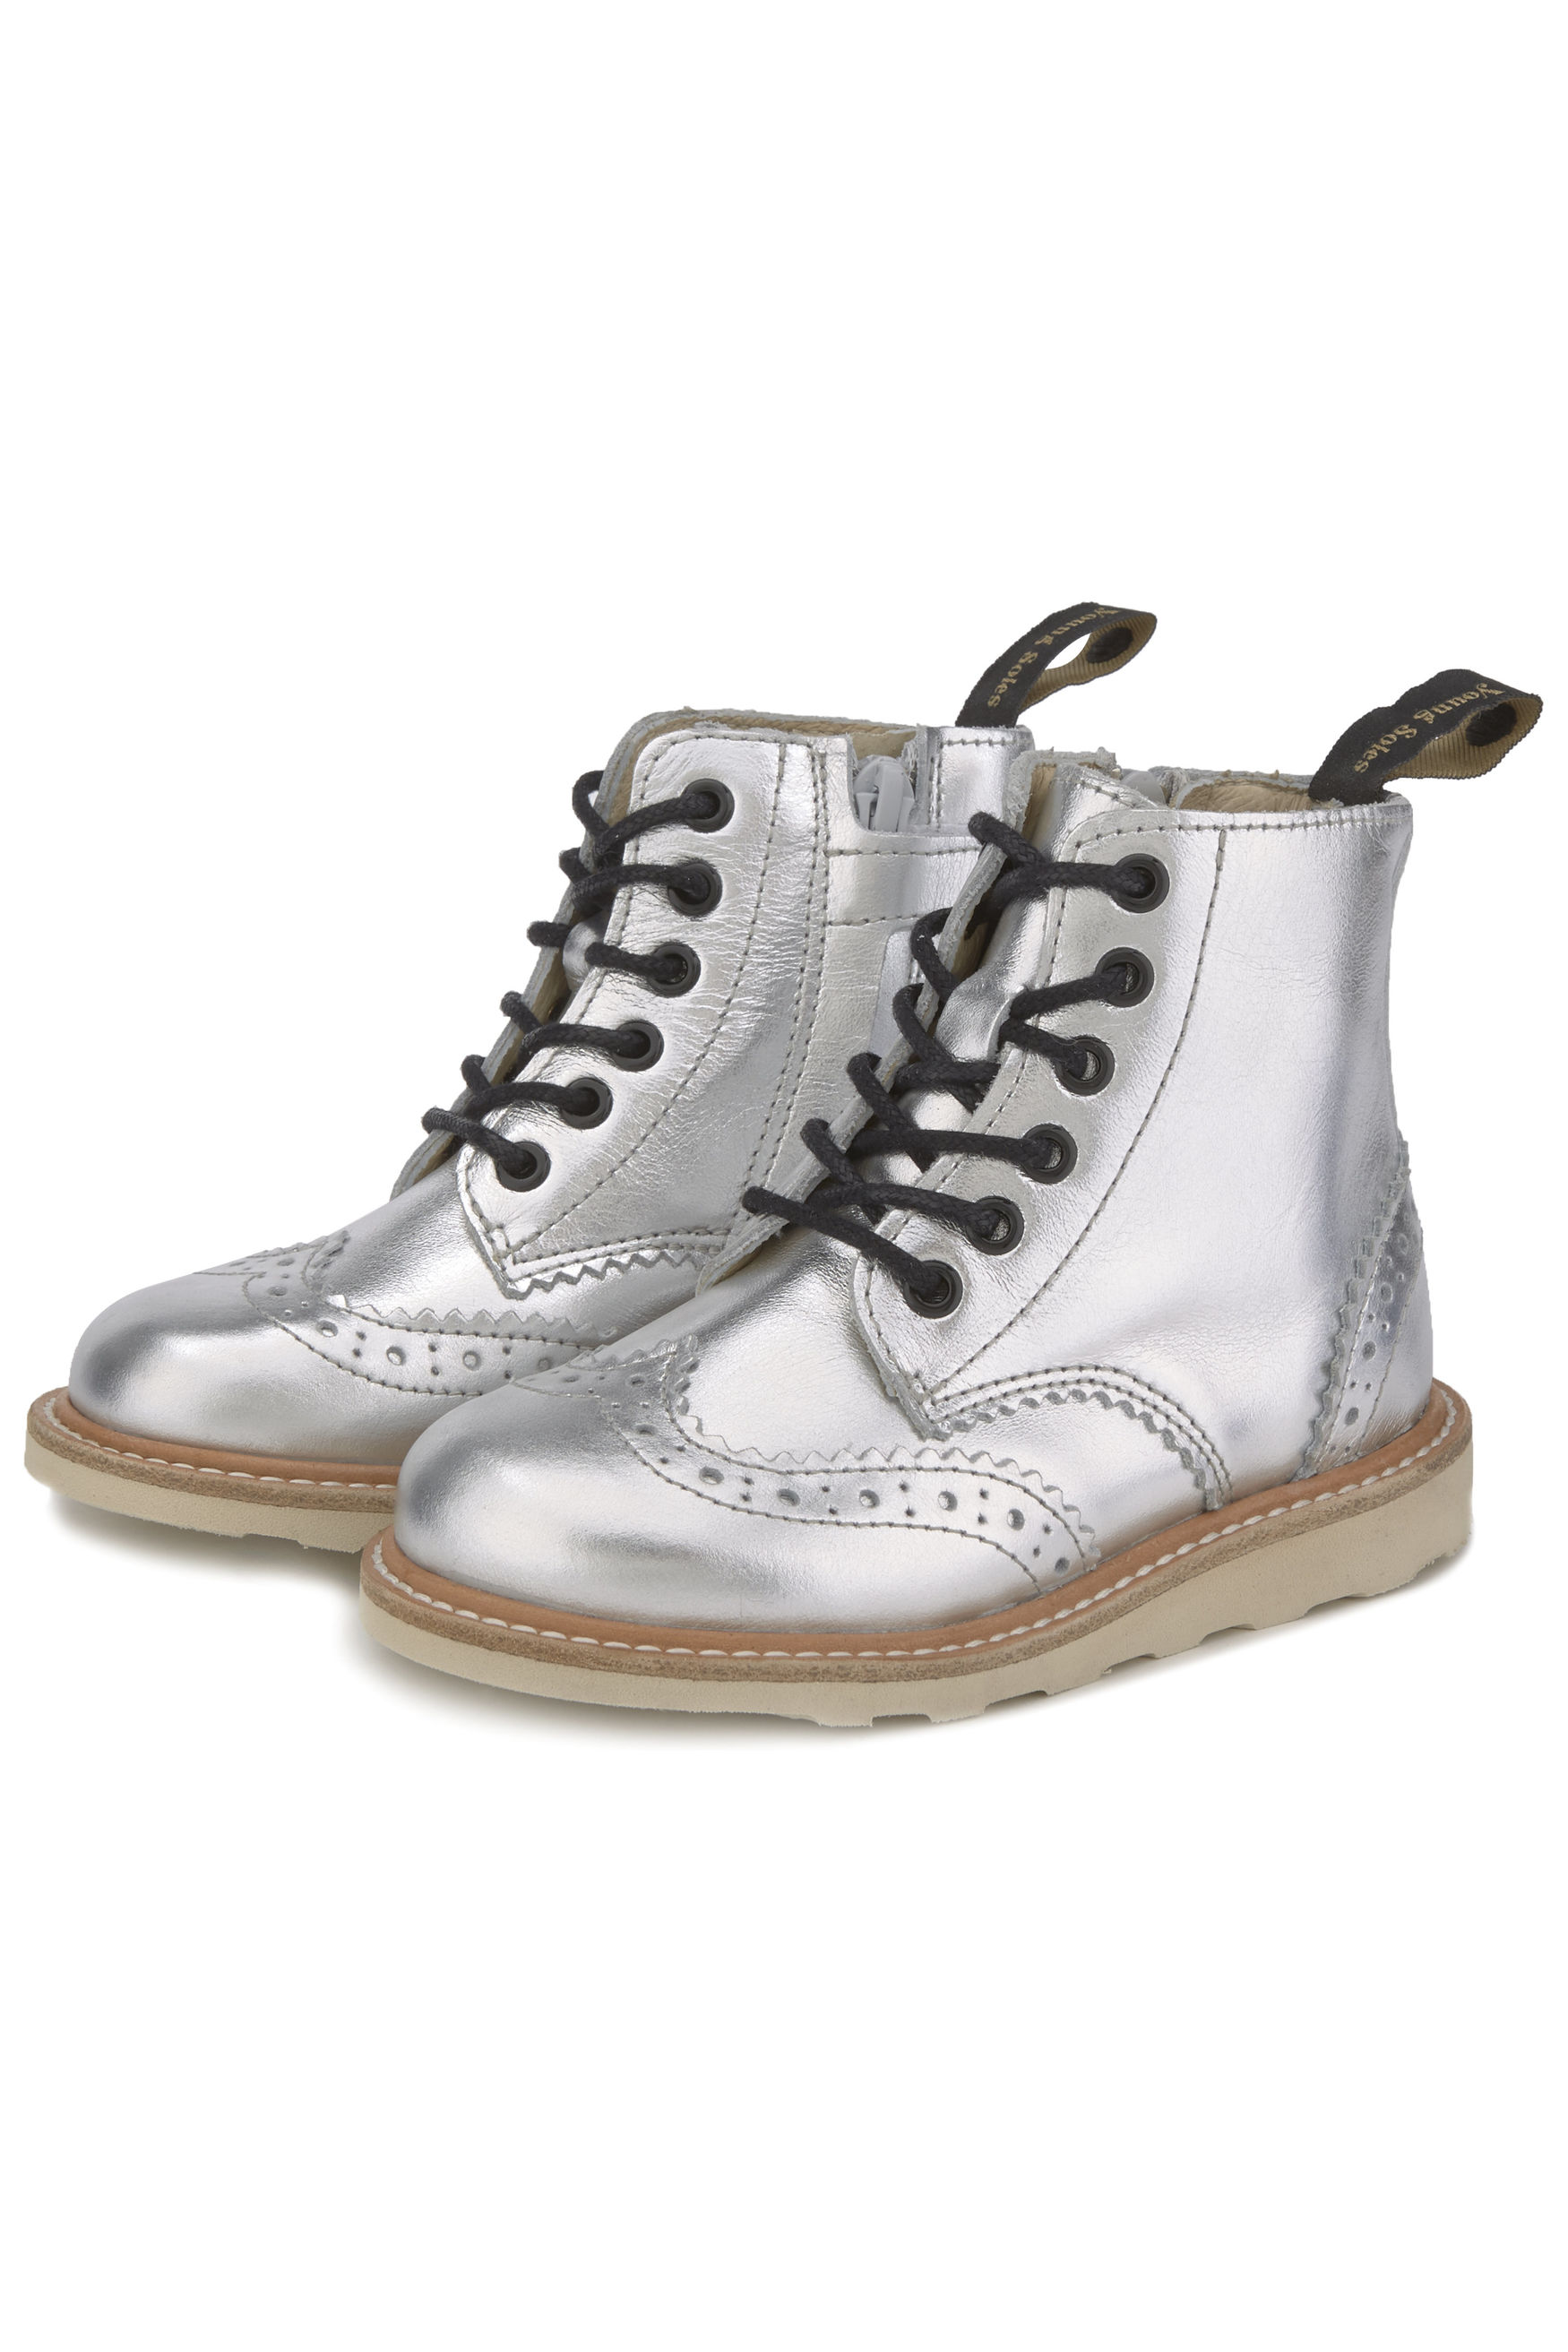 Young Soles Silver Leather Sidney Baby Boots